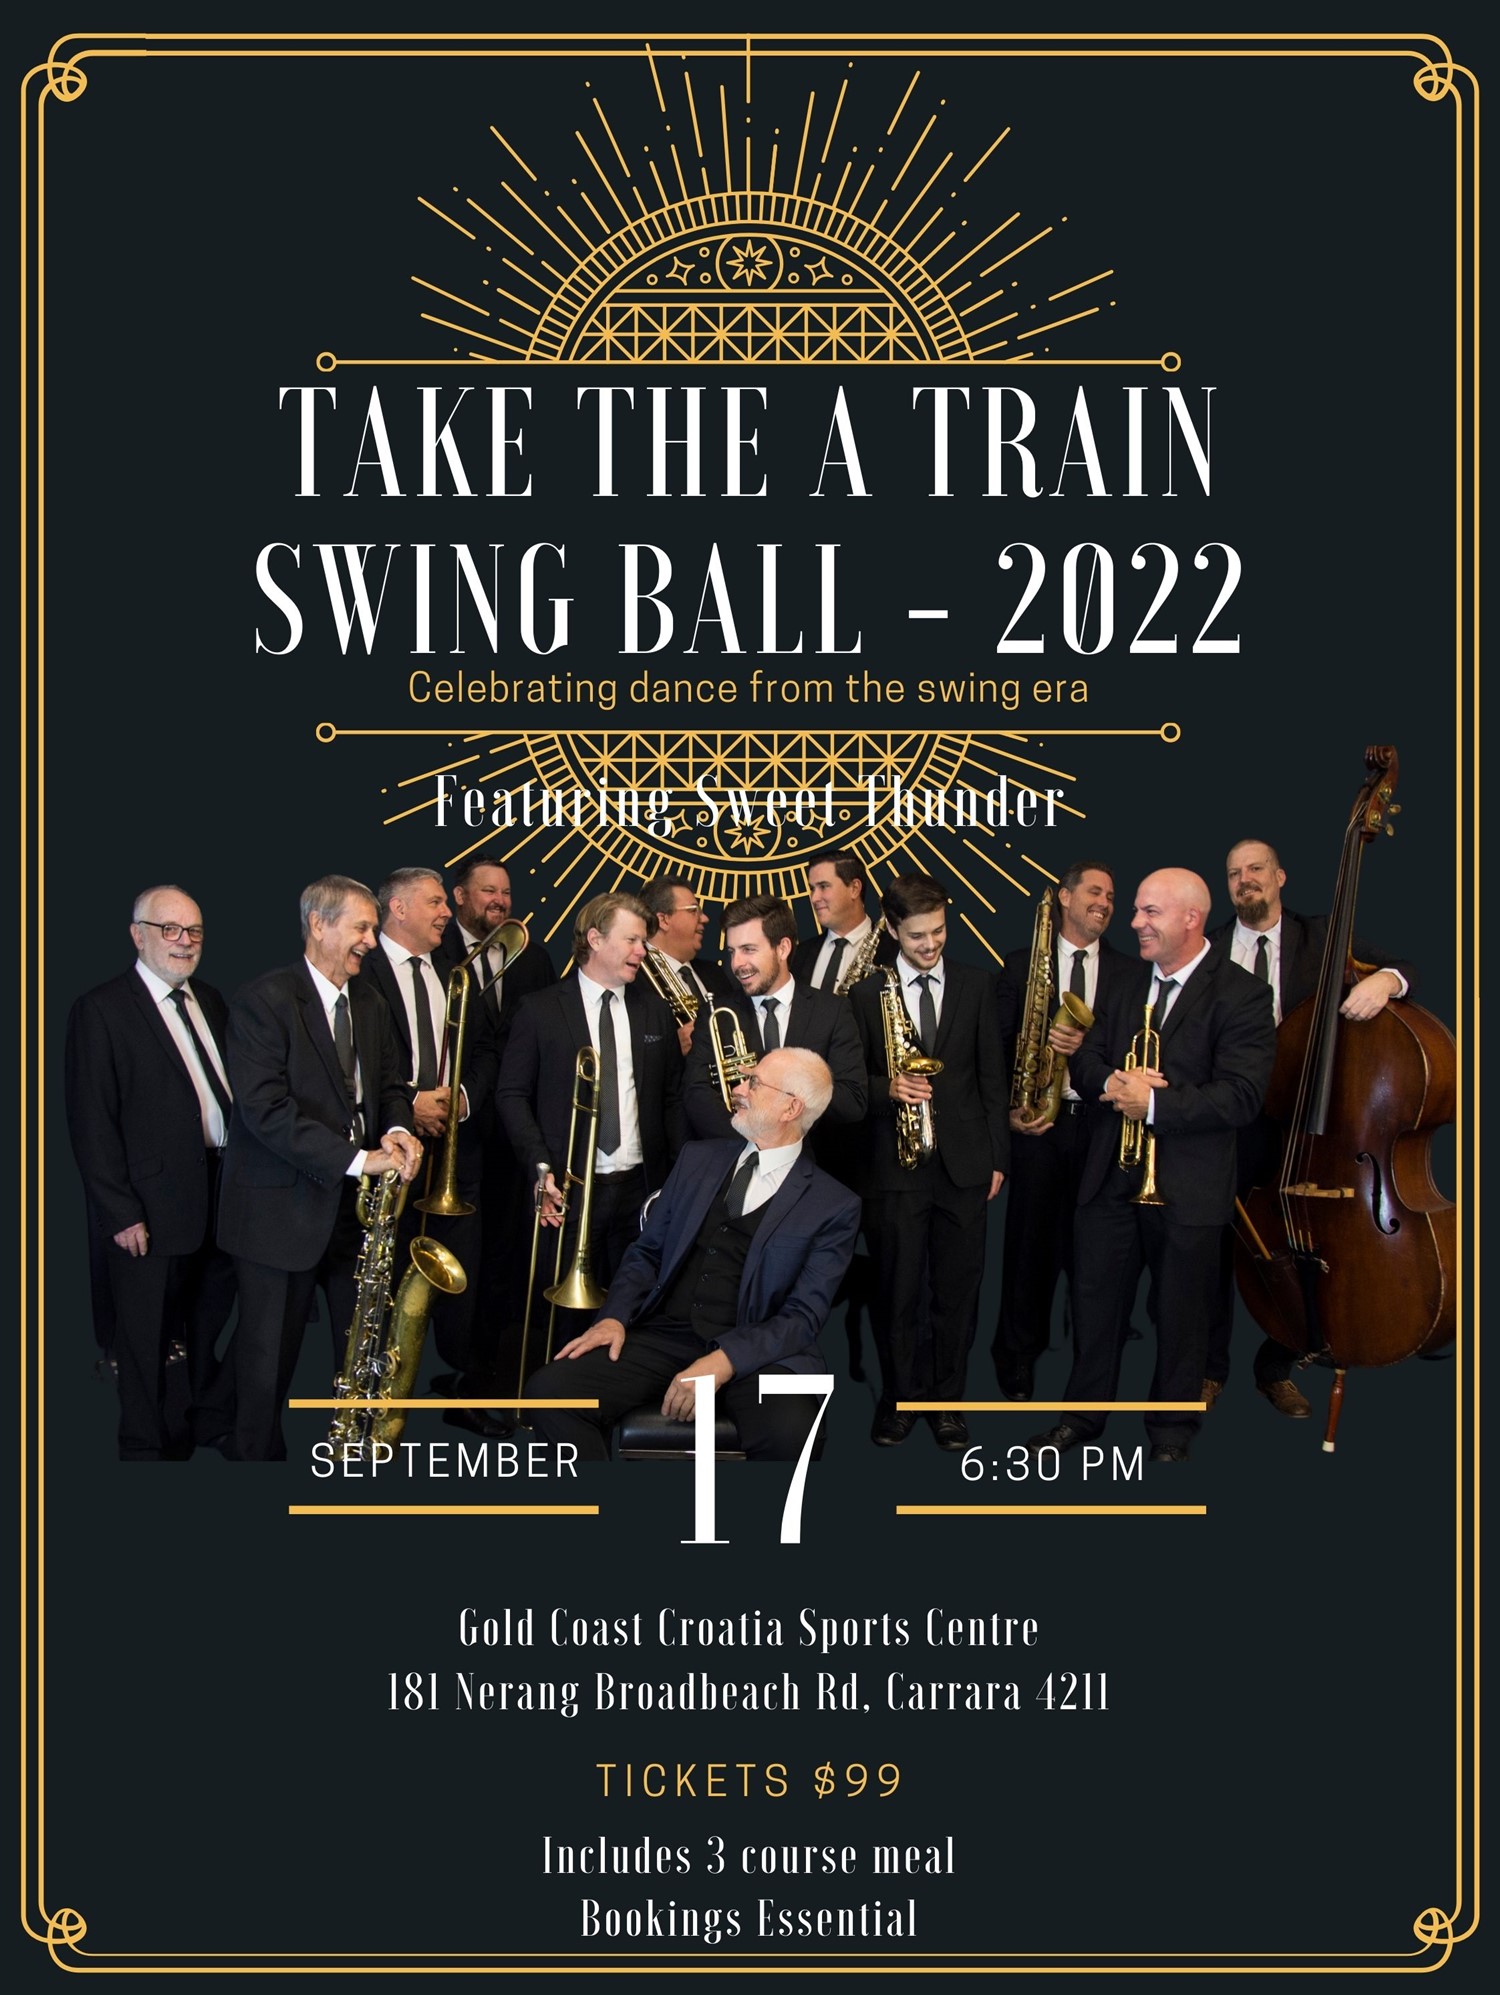 Take the A Train Swing Ball  on sep. 17, 18:30@Gold Coast Croatian Sports Centre - Pick a seat, Buy tickets and Get information on  